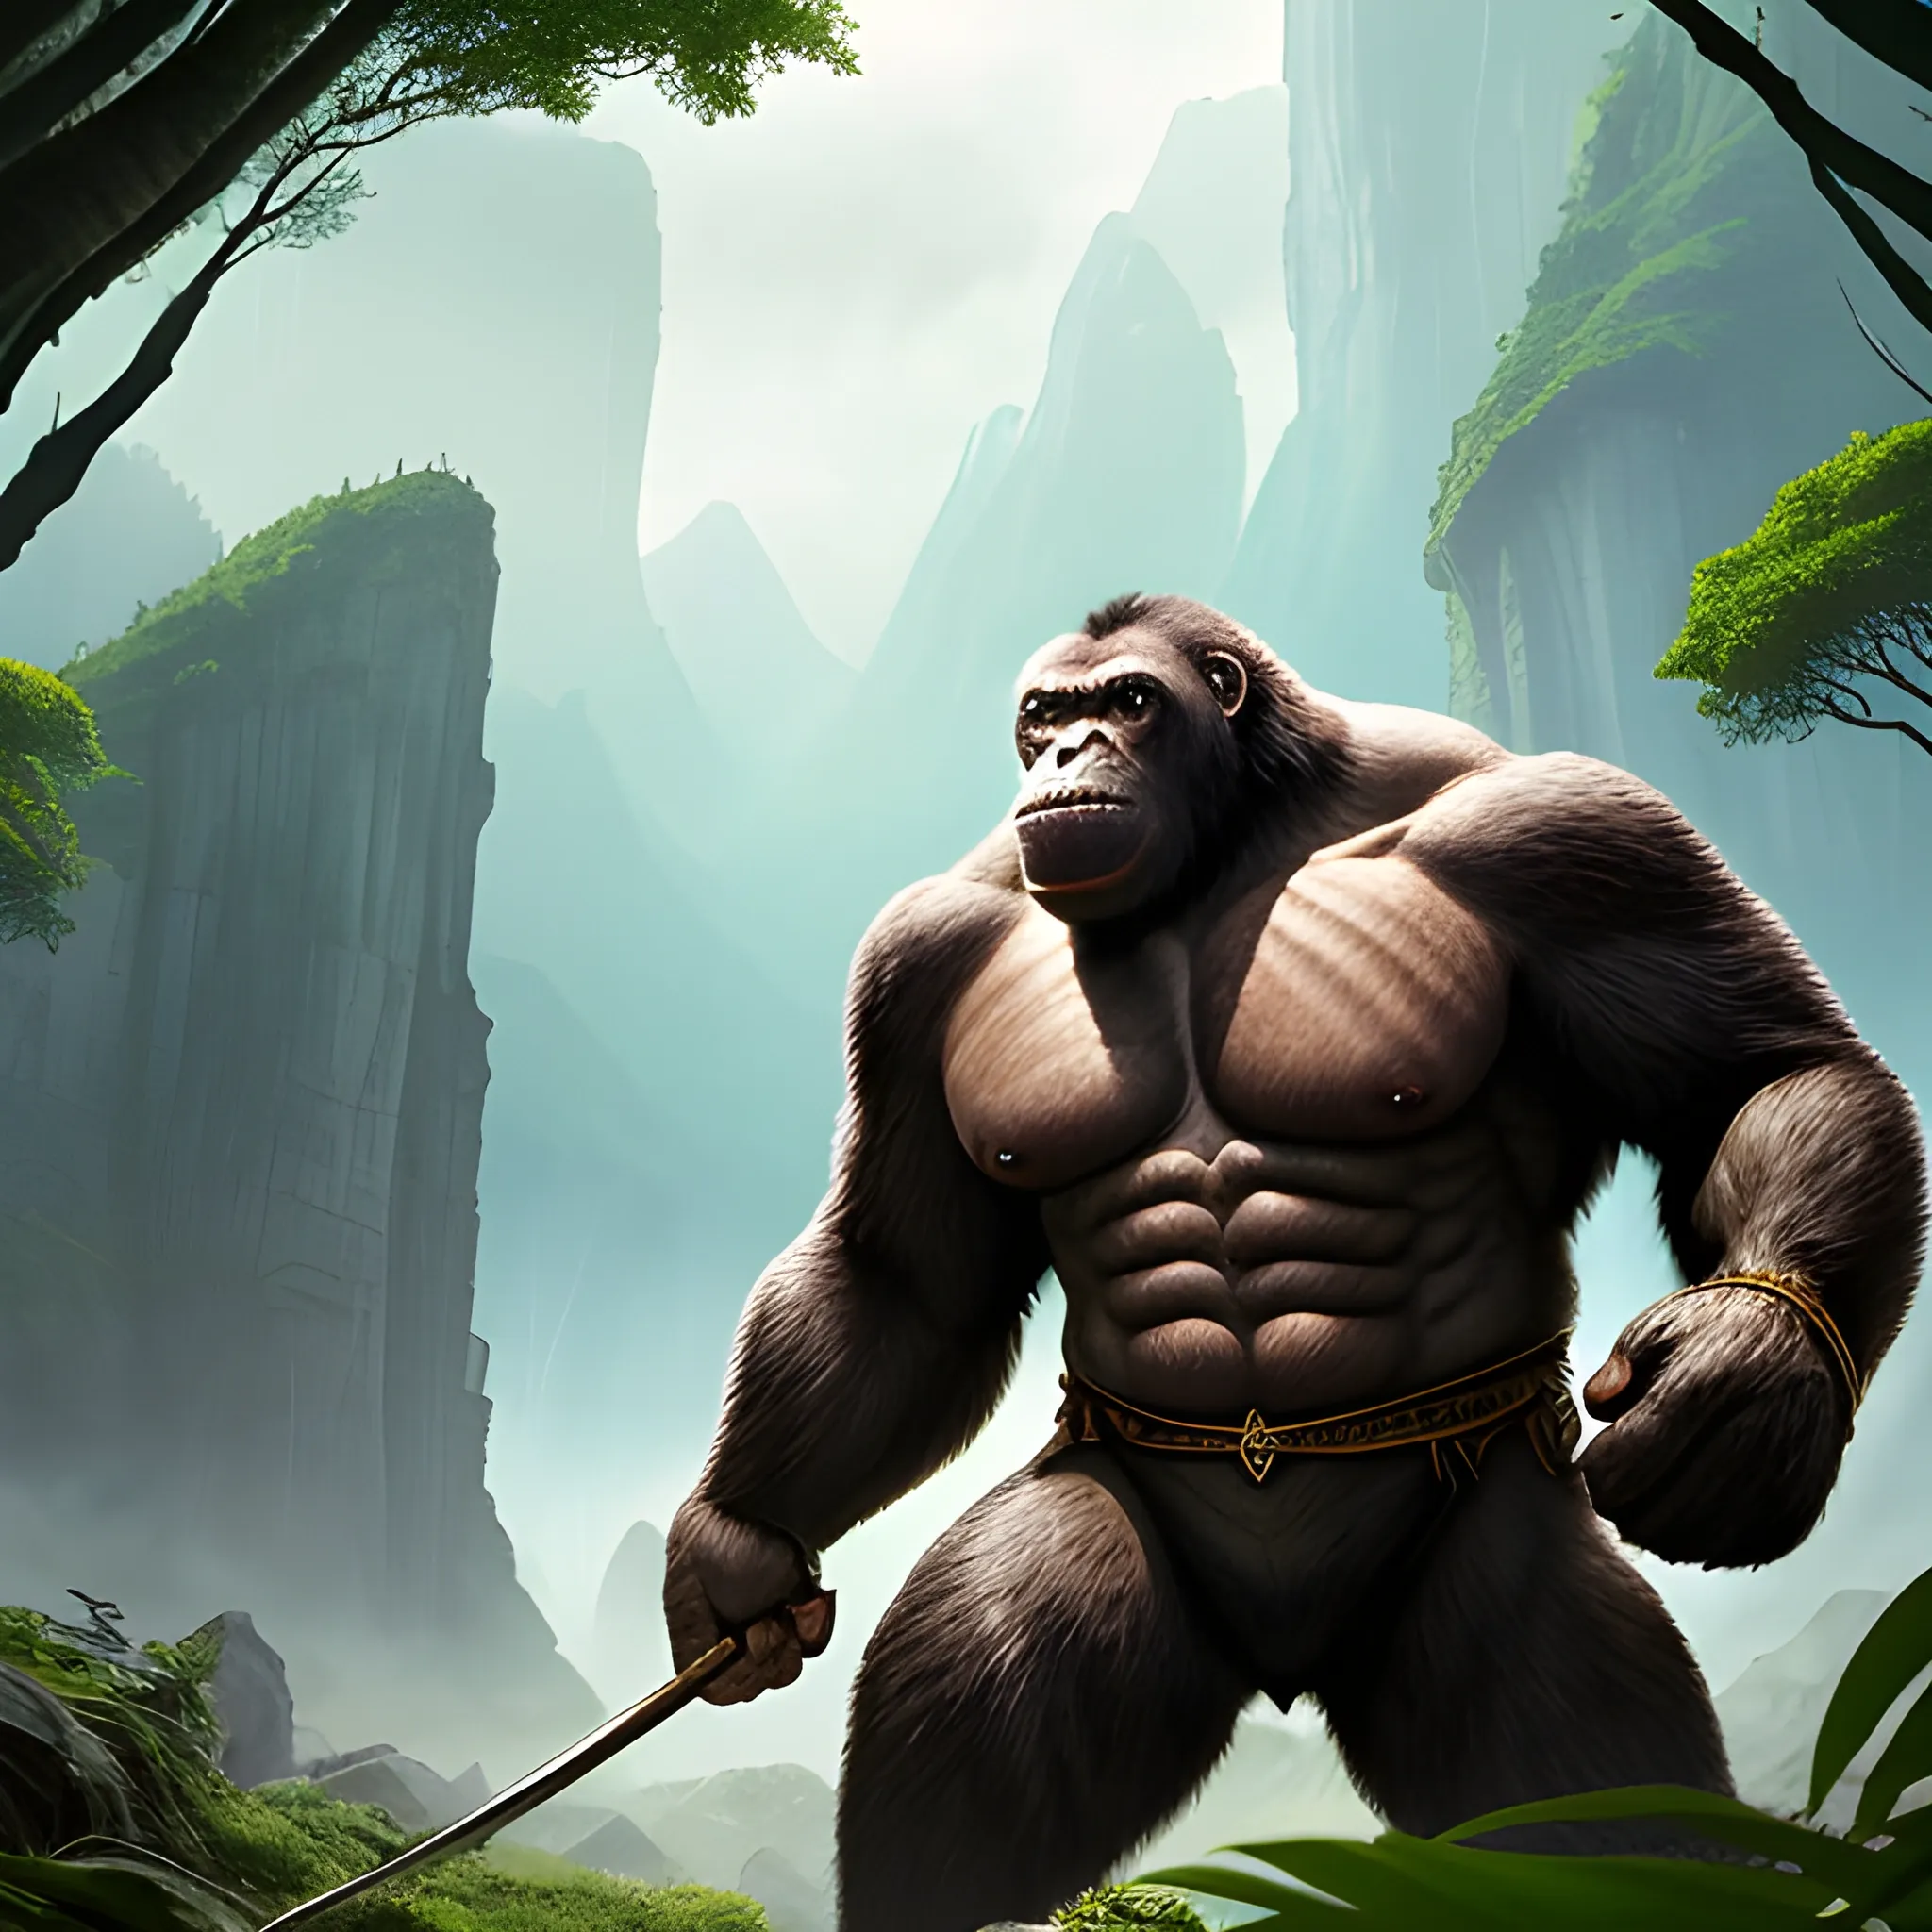 Appearance: The Giant Strong-Looking Ape is a colossal and awe-inspiring creature, towering over its smaller relatives with unmatched size and strength. It stands at least 15 feet tall when fully upright, its massive frame covered in thick and coarse fur that can range from dark brown to gray. The ape's muscular arms are capable of delivering devastating blows, and its hands have opposable thumbs, allowing it to manipulate objects with surprising dexterity for a creature of its size.

Features: The Giant Strong-Looking Ape is a behemoth of raw power, possessing unmatched physical strength and resilience. Its formidable arms and massive claws make it a terrifying combatant, capable of crushing enemies with ease. In addition to its physical prowess, the Giant Strong-Looking Ape's intelligence is exceptional, enabling it to solve problems and even learn simple communication with others.

Habitat: Giant Strong-Looking Apes inhabit remote and isolated regions, such as deep jungles, unexplored mountains, or hidden valleys. They are reclusive creatures, rarely encountered by humanoids. In your DND world, they might be guardians of ancient temples or sacred groves, revered as wise and powerful beings.

Behavior: The Giant Strong-Looking Ape lives in small family groups, consisting of a dominant male, females, and offspring. While generally peaceful, they are fiercely protective of their territory and kin, resorting to aggressive displays or combat if threatened. Despite their fearsome appearance, they prefer to avoid conflict and are known to be surprisingly gentle with those who show respect and kindness.

Role in the World: In your DND world, Giant Strong-Looking Apes could be enigmatic and mythical beings, seen as guardians of ancient secrets or protectors of nature's balance. Druids and rangers might form deep bonds with these majestic creatures, viewing them as ancient and wise allies in their quest to safeguard the natural world.

Encountering a Giant Strong-Looking Ape in the wild is a rare and breathtaking event for adventurers. Players may feel a sense of awe and wonder as they behold this colossal creature, dwarfing everything around it with its immense size. If approached with caution and respect, adventurers might witness the intelligence and wisdom behind the Giant Strong-Looking Ape's eyes, offering opportunities for meaningful interactions and alliances.

The presence of Giant Strong-Looking Apes in your campaign adds an air of mystery and majesty to remote and unexplored regions. Players may encounter these legendary creatures while venturing into uncharted territories or seeking to uncover ancient knowledge. Interacting with Giant Strong-Looking Apes can become a profound and transformative experience for adventurers, reminding them of the delicate balance between humanity and the natural world. These colossal beings can serve as both formidable opponents and steadfast allies, enriching the tapestry of your DND world with their legendary presence.